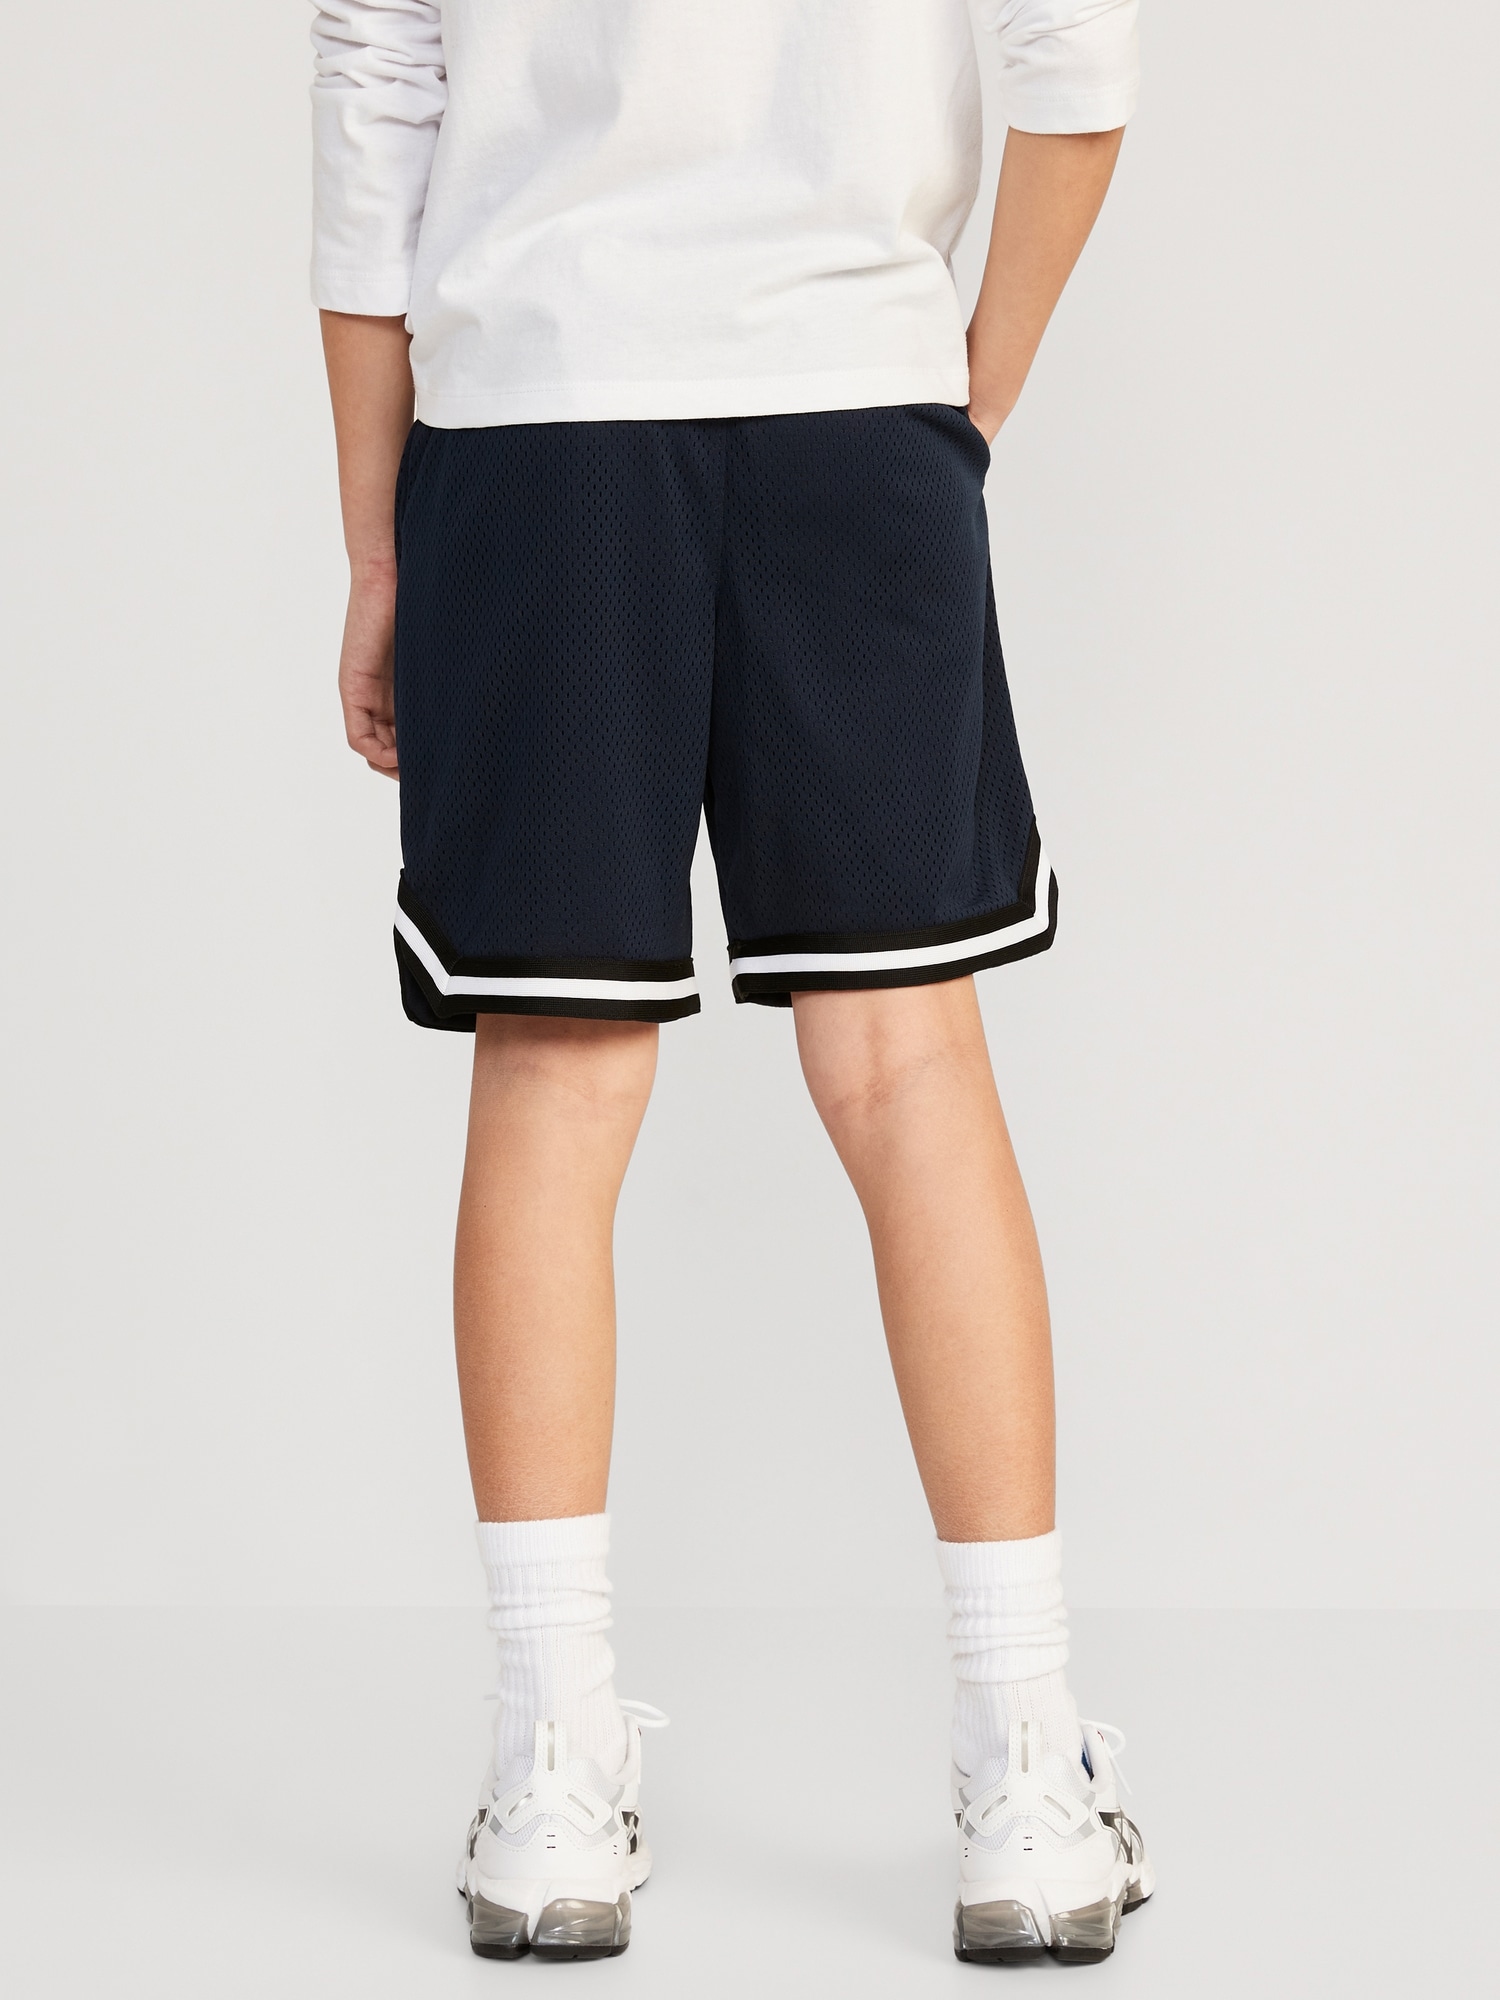 Does anything go with basketball shorts? - Quora